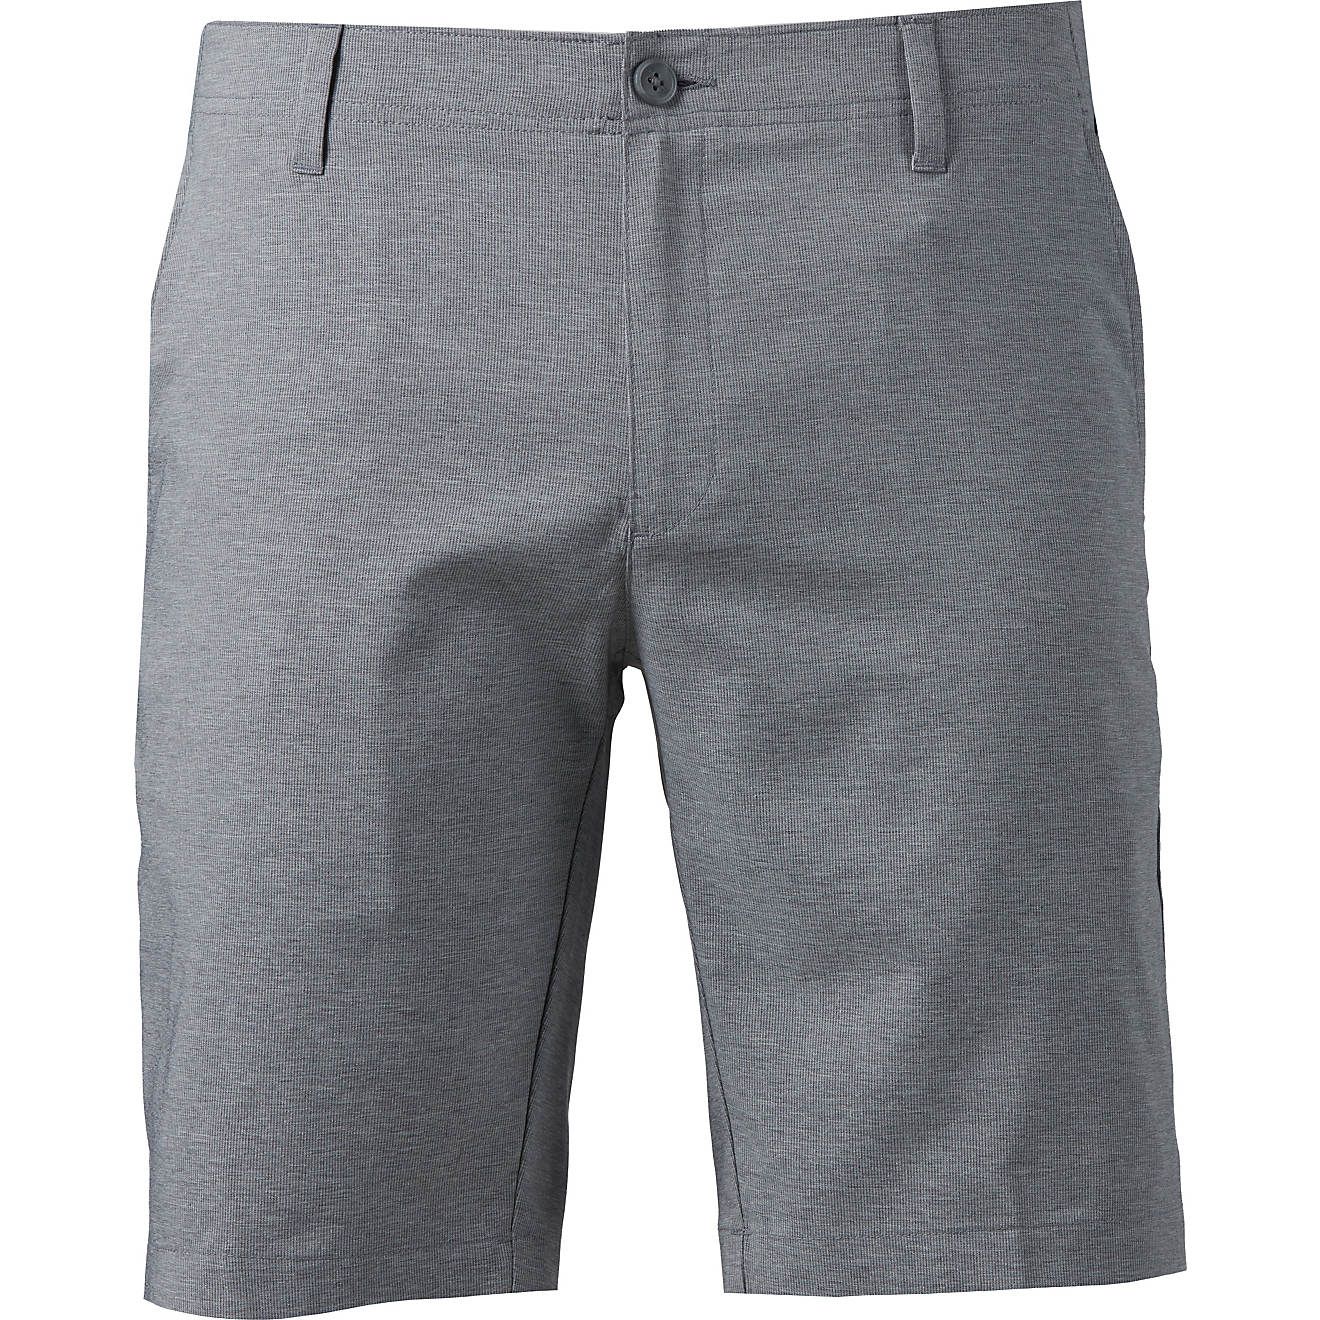 BCG Men's Essential Golf Shorts | Academy Sports + Outdoor Affiliate